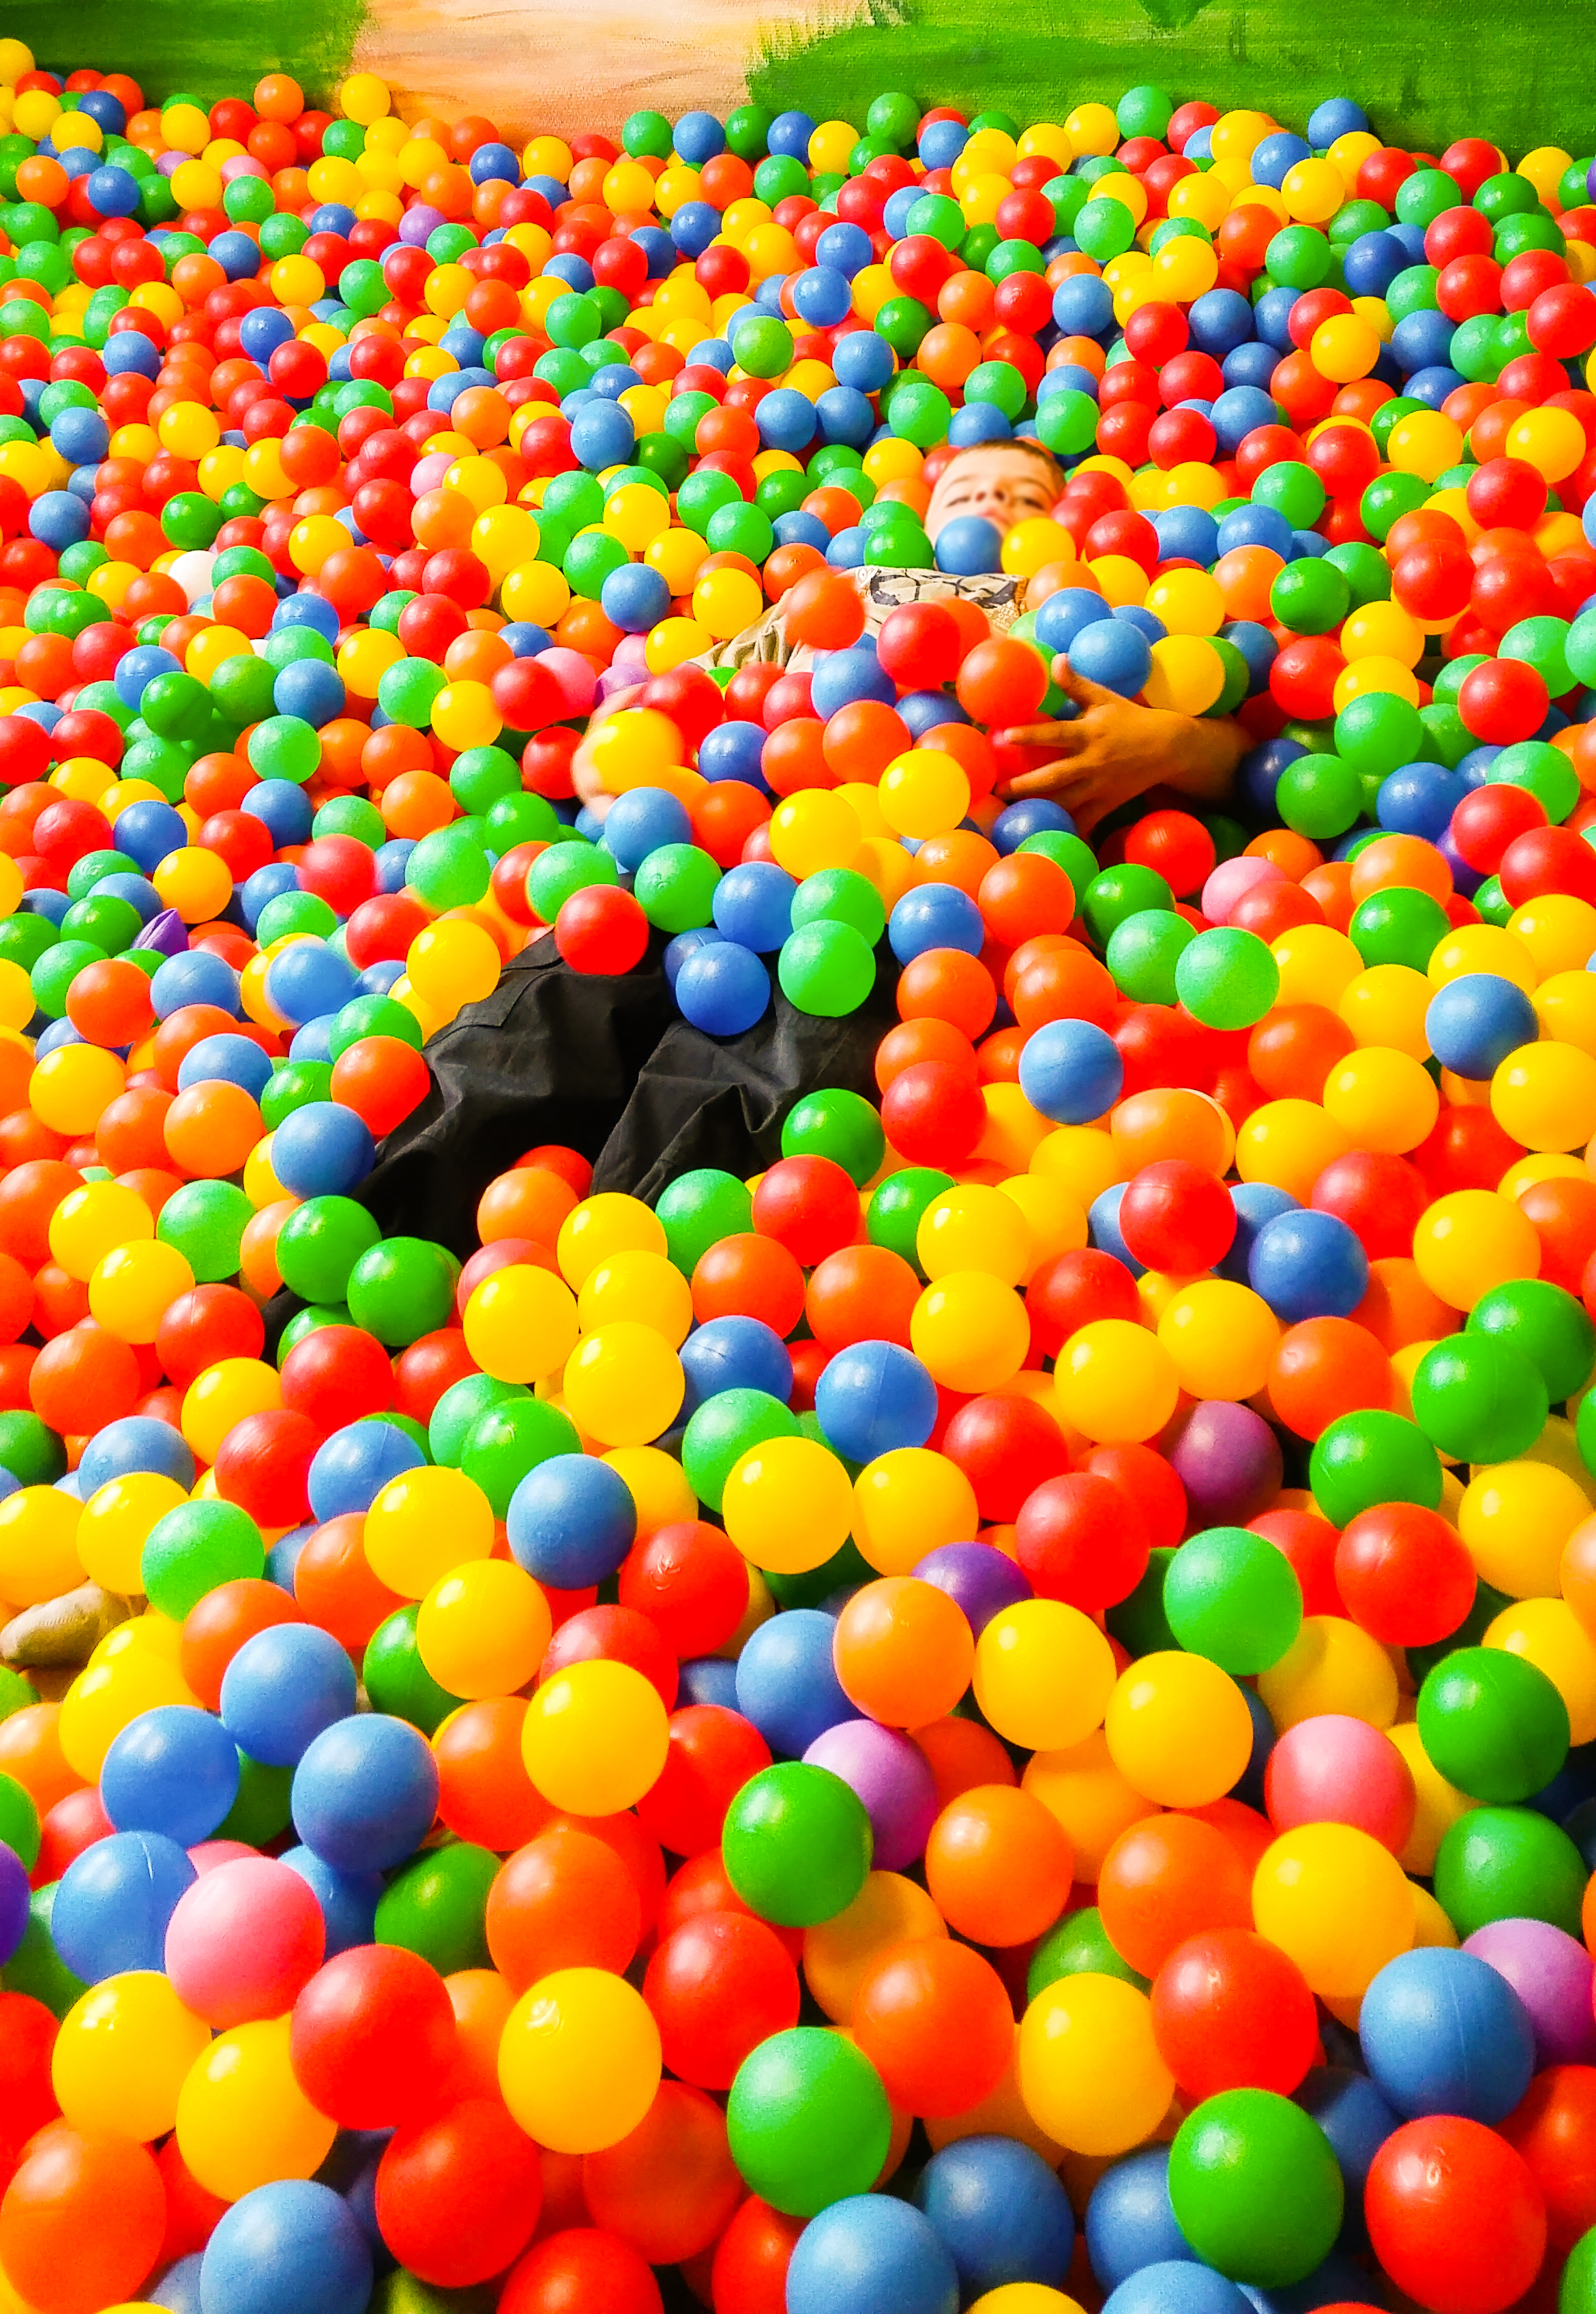 mini ball pit for babies